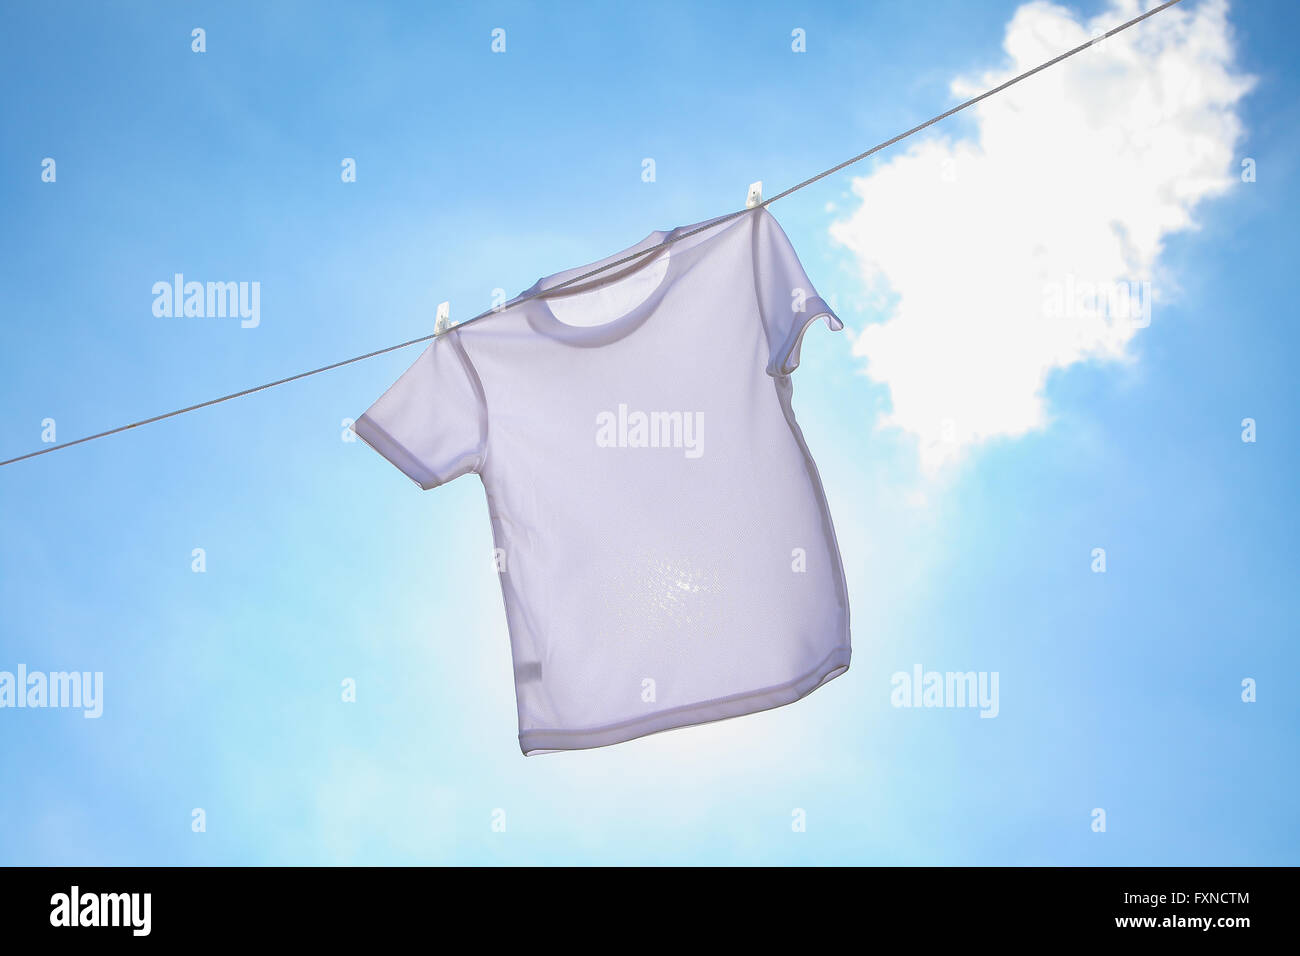 Laundry hanging against blue sky Stock Photo